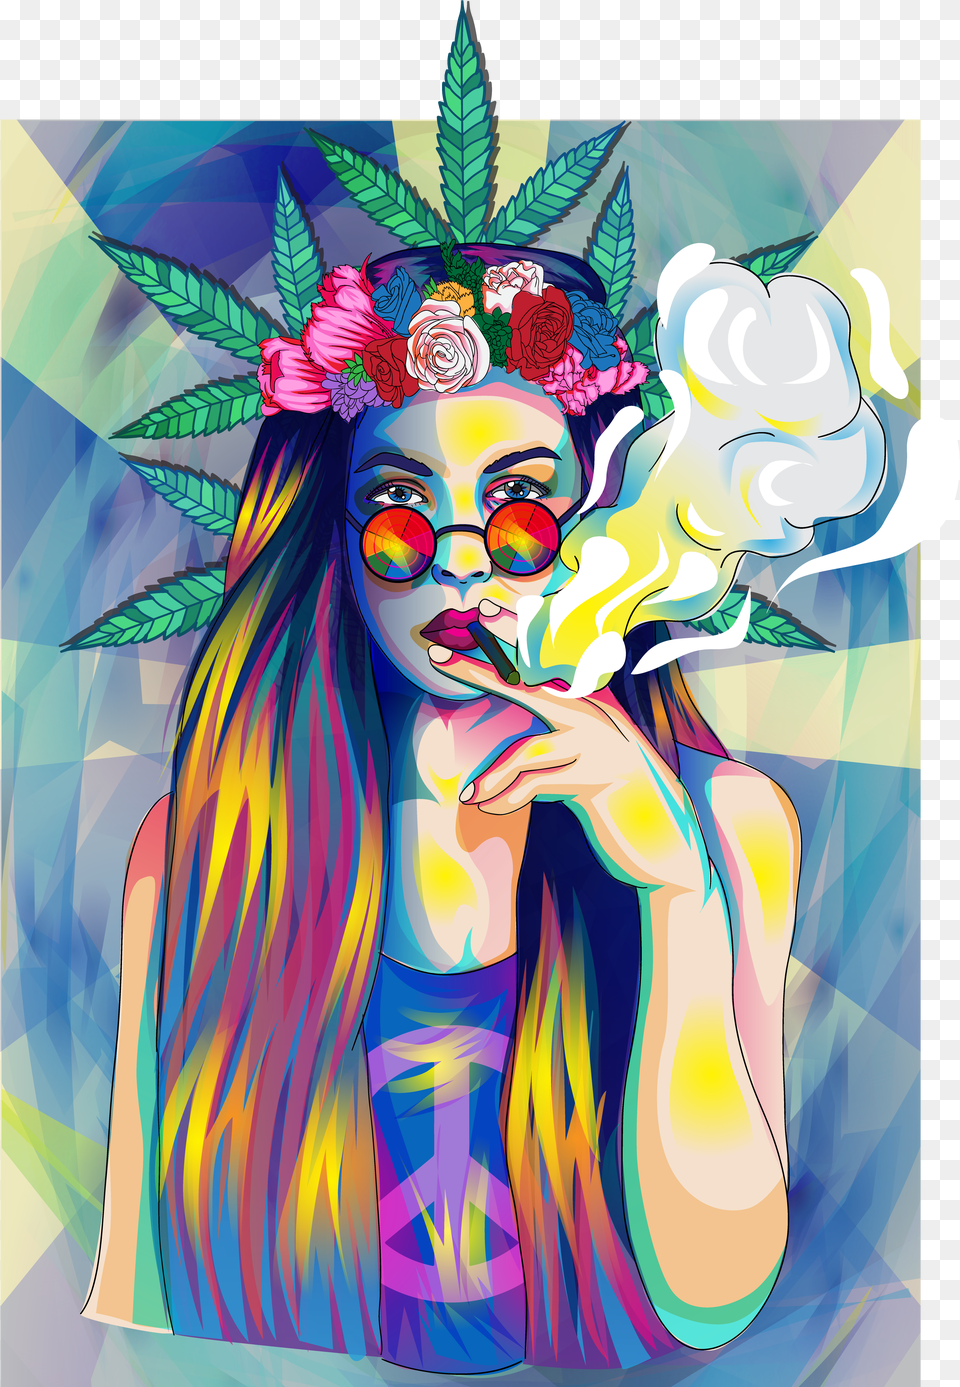 This Hippie Girl Flower Power 60s 70s Weed Marihuana Hippie Png Image